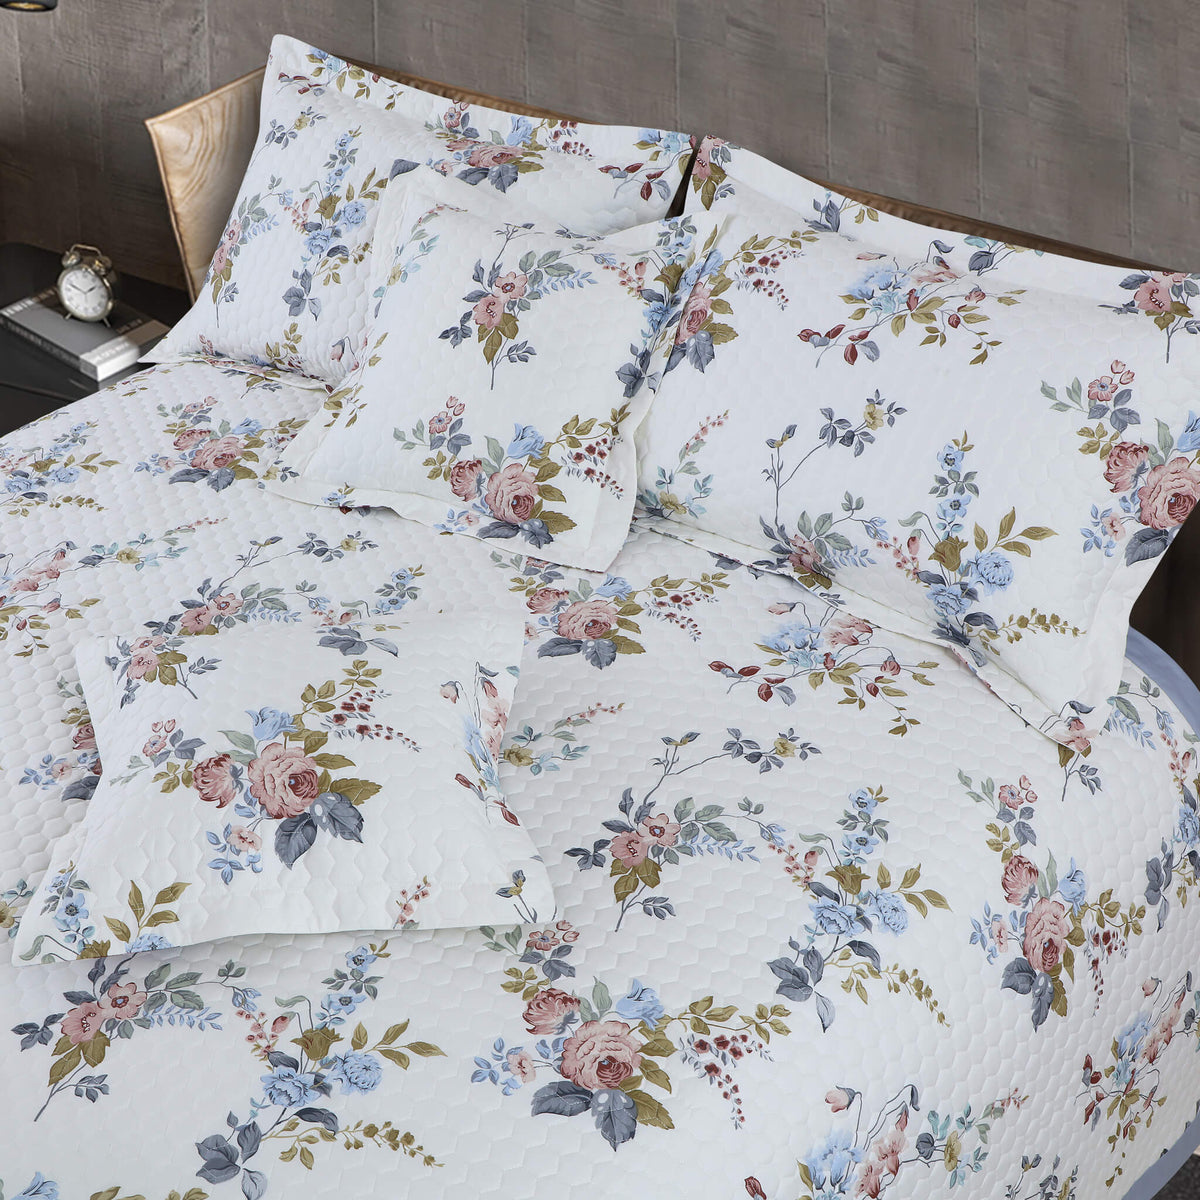 Malako Royale White Floral 100% Cotton King Size Quilted Bedspread - MALAKO